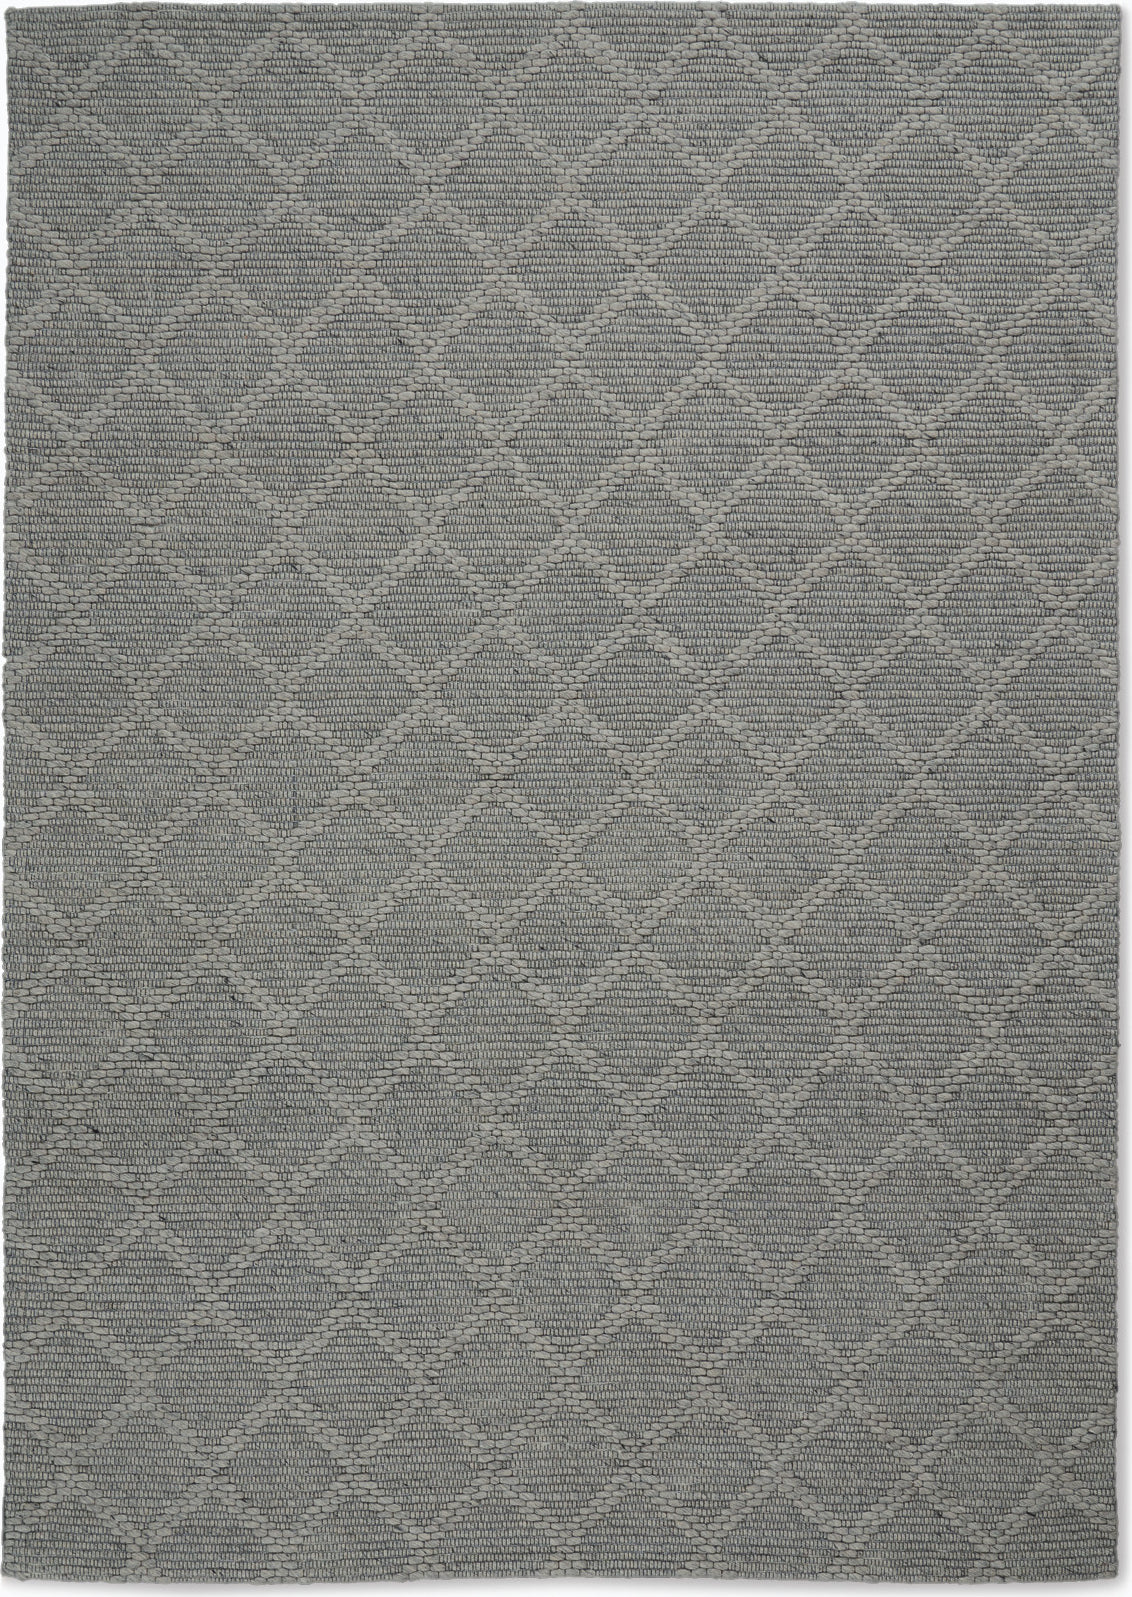 Calvin Klein CK840 Tallahassee Grey Area Rug – Incredible Rugs and Decor